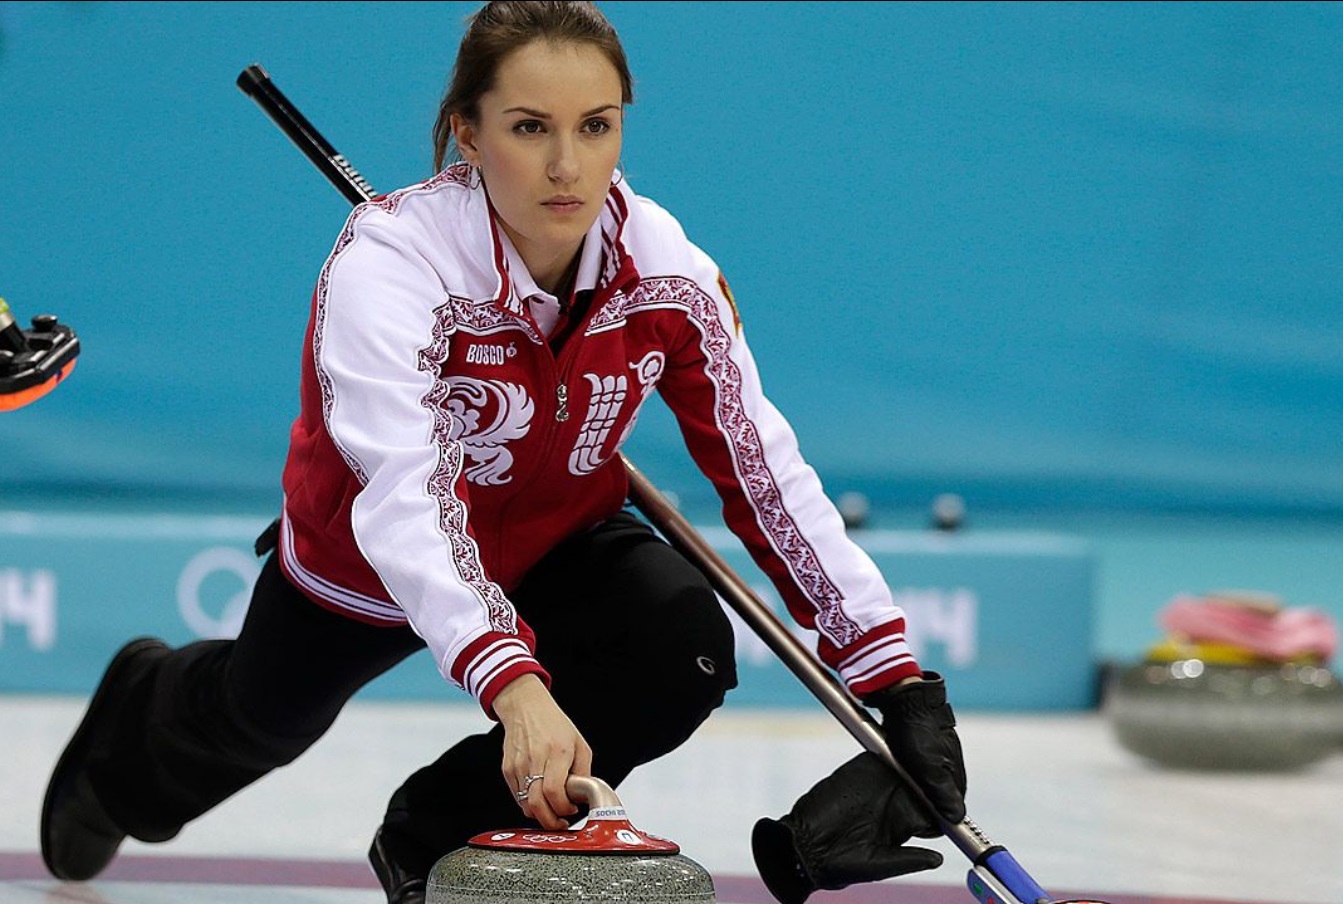 The 200 Pics of Hottest Athletes At The Sochi Olympics. 